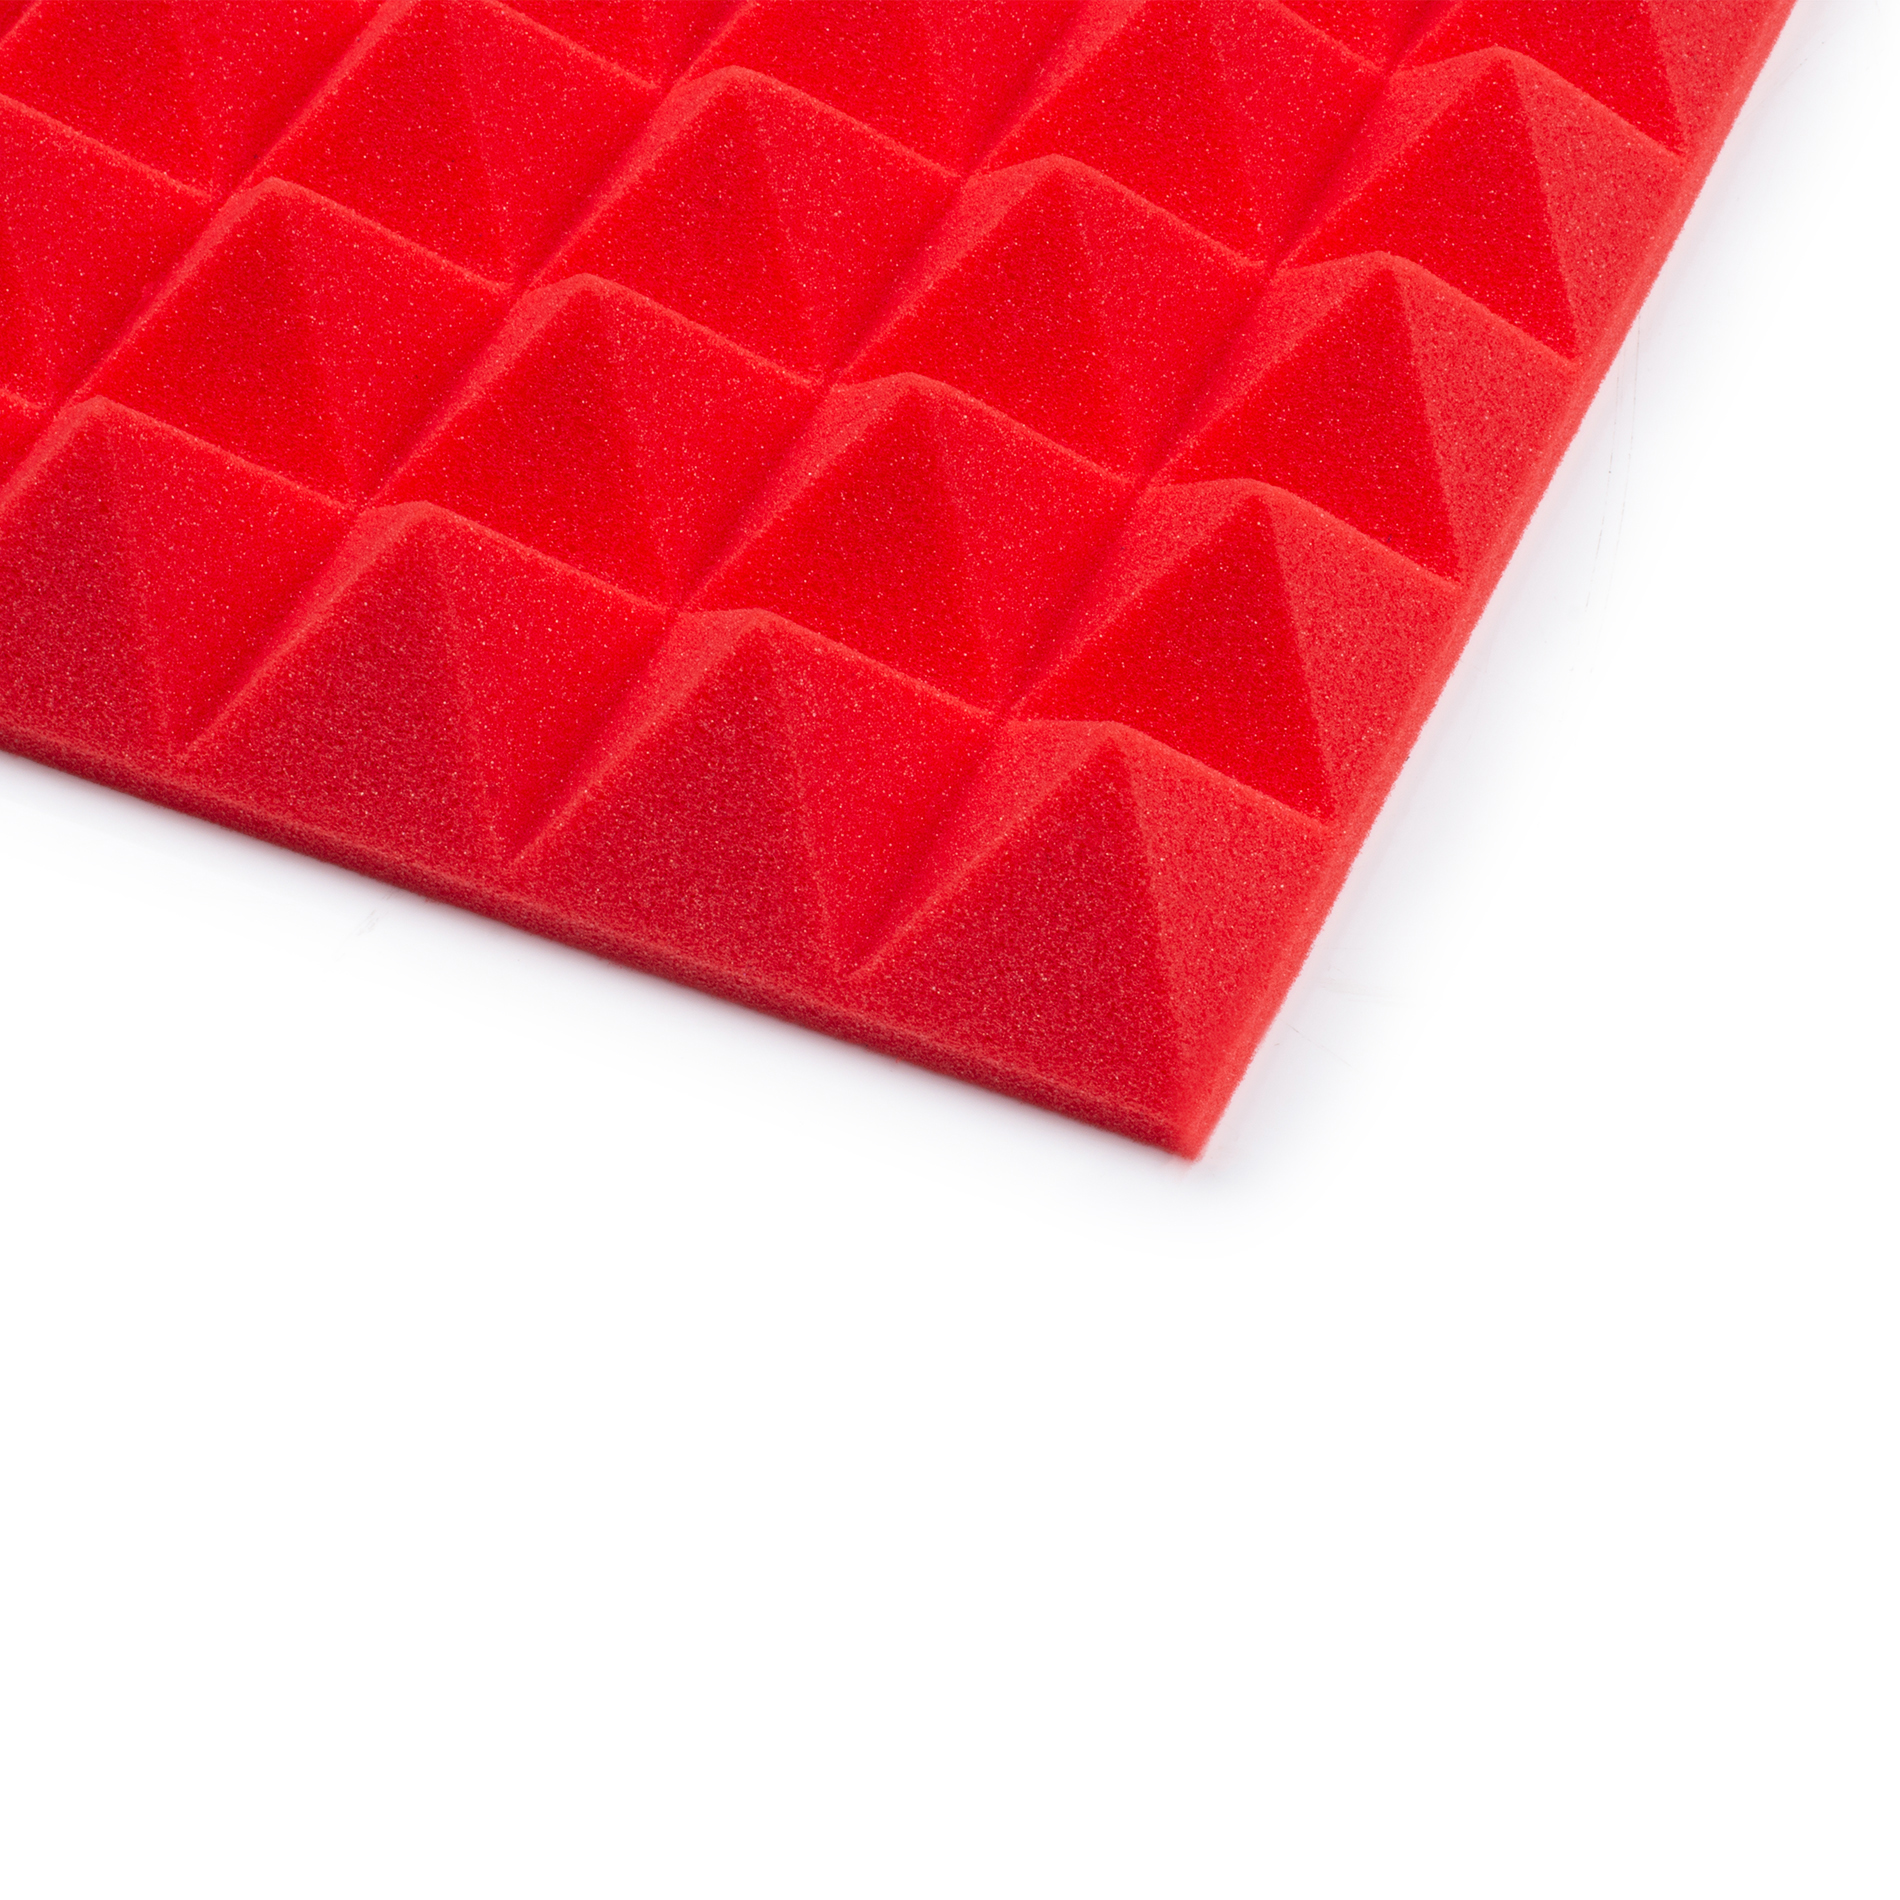 2 Pack of Red 12×12″ Acoustic Pyramid Panel-GFW-ACPNL1212PRED-2PK